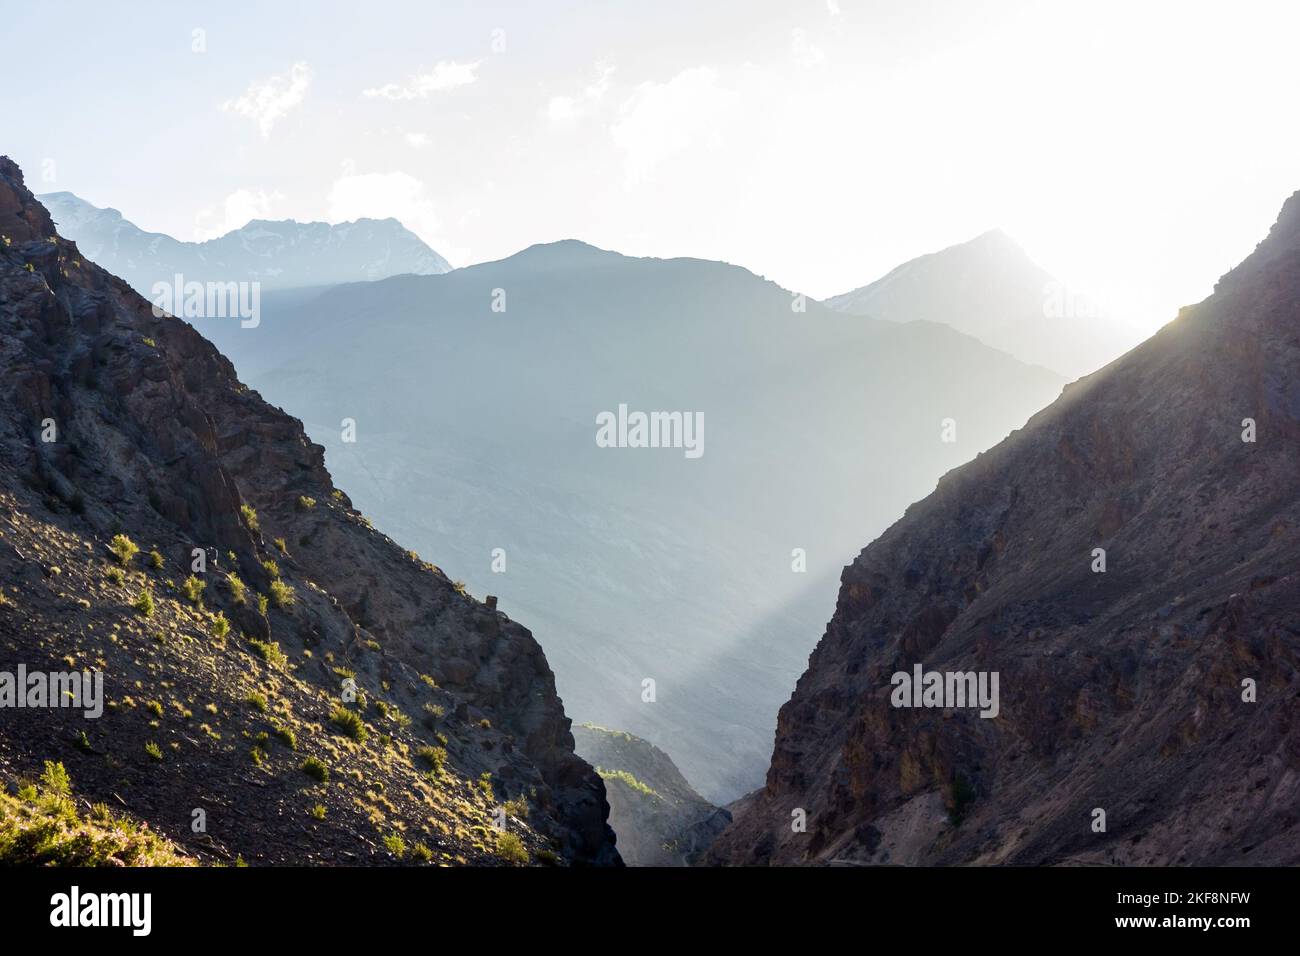 Sunlight filtering through the steep cliffs and deep gorges of the canyons of the mountains in Zanskar. Stock Photo